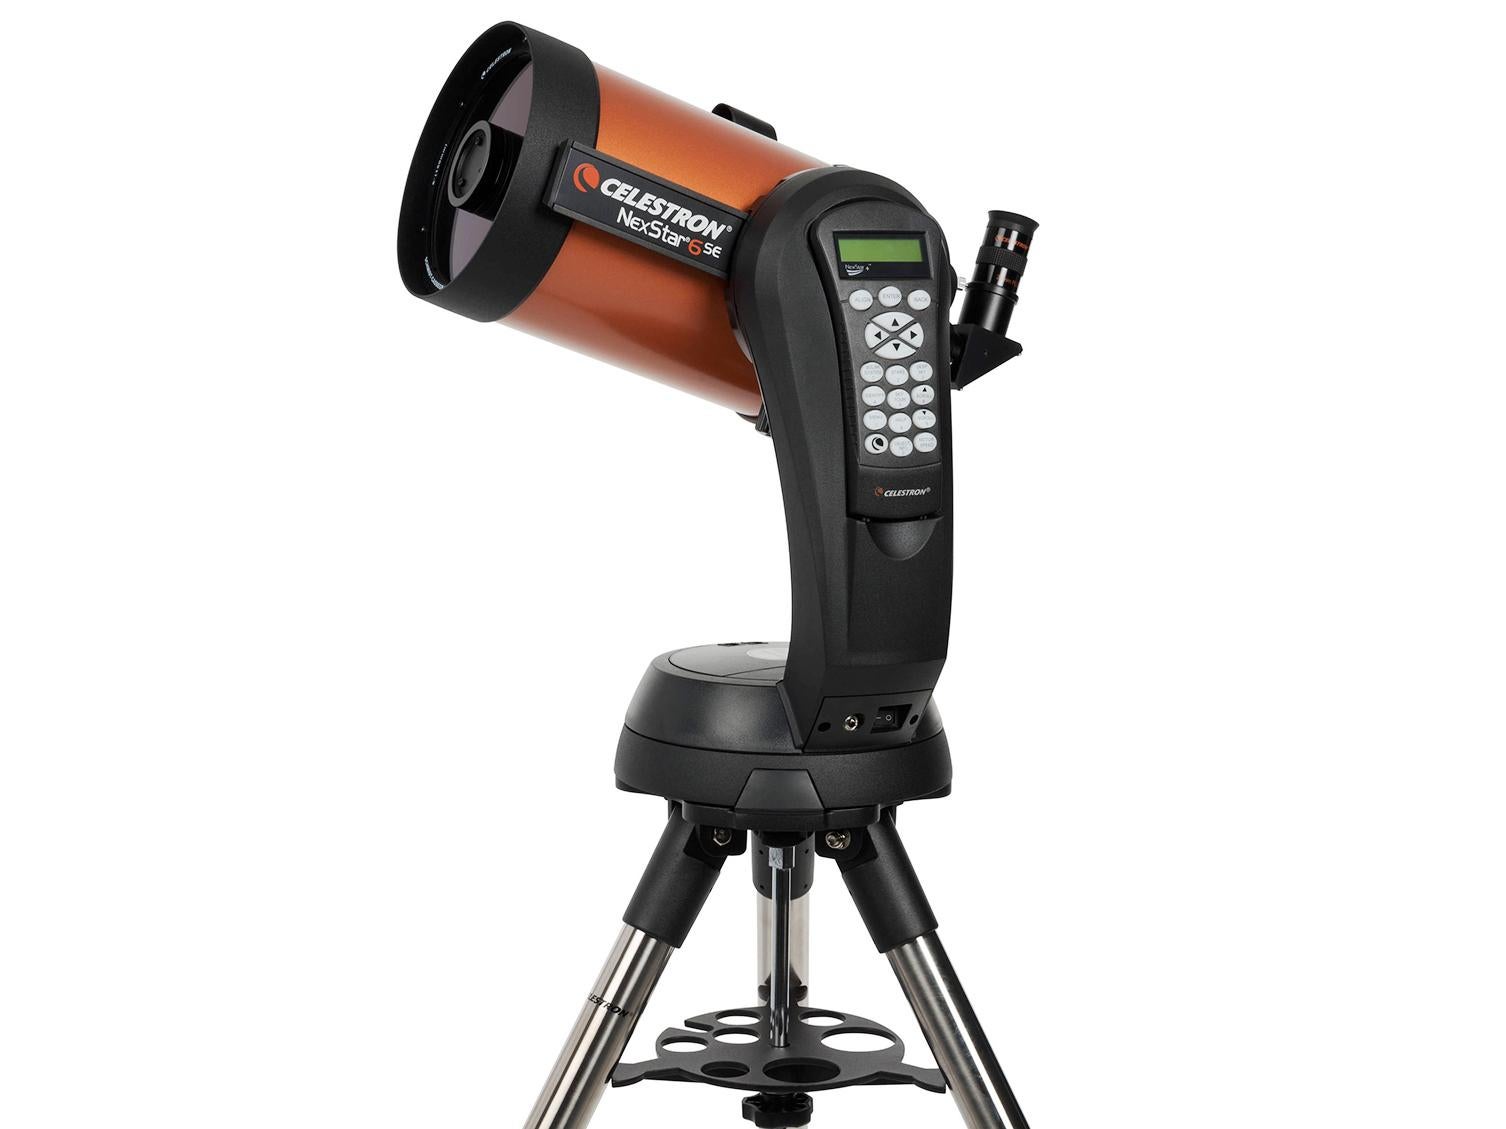 best telescope for home use